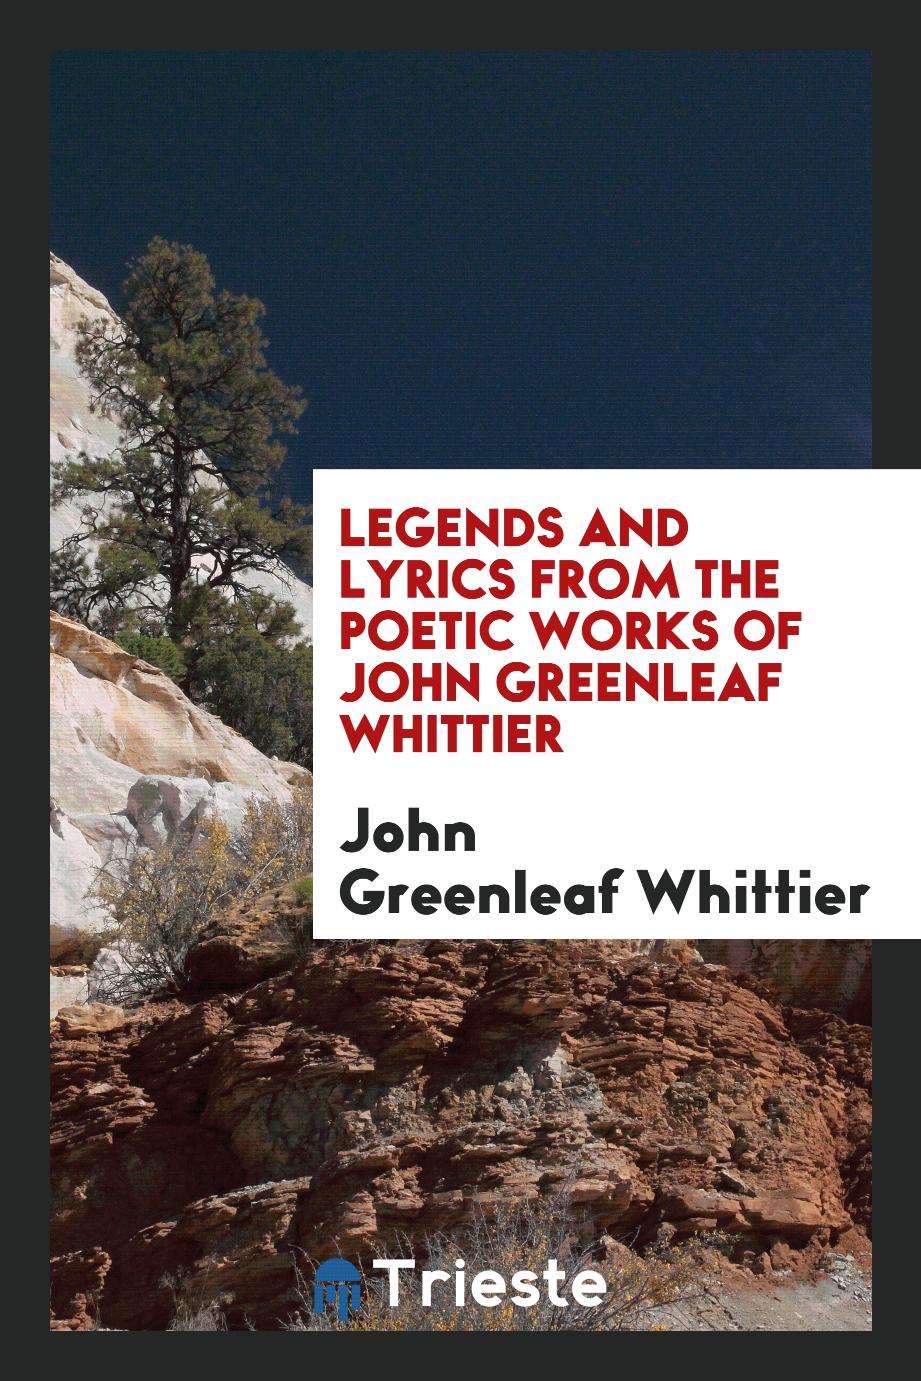 Legends and lyrics from the poetic works of John Greenleaf Whittier